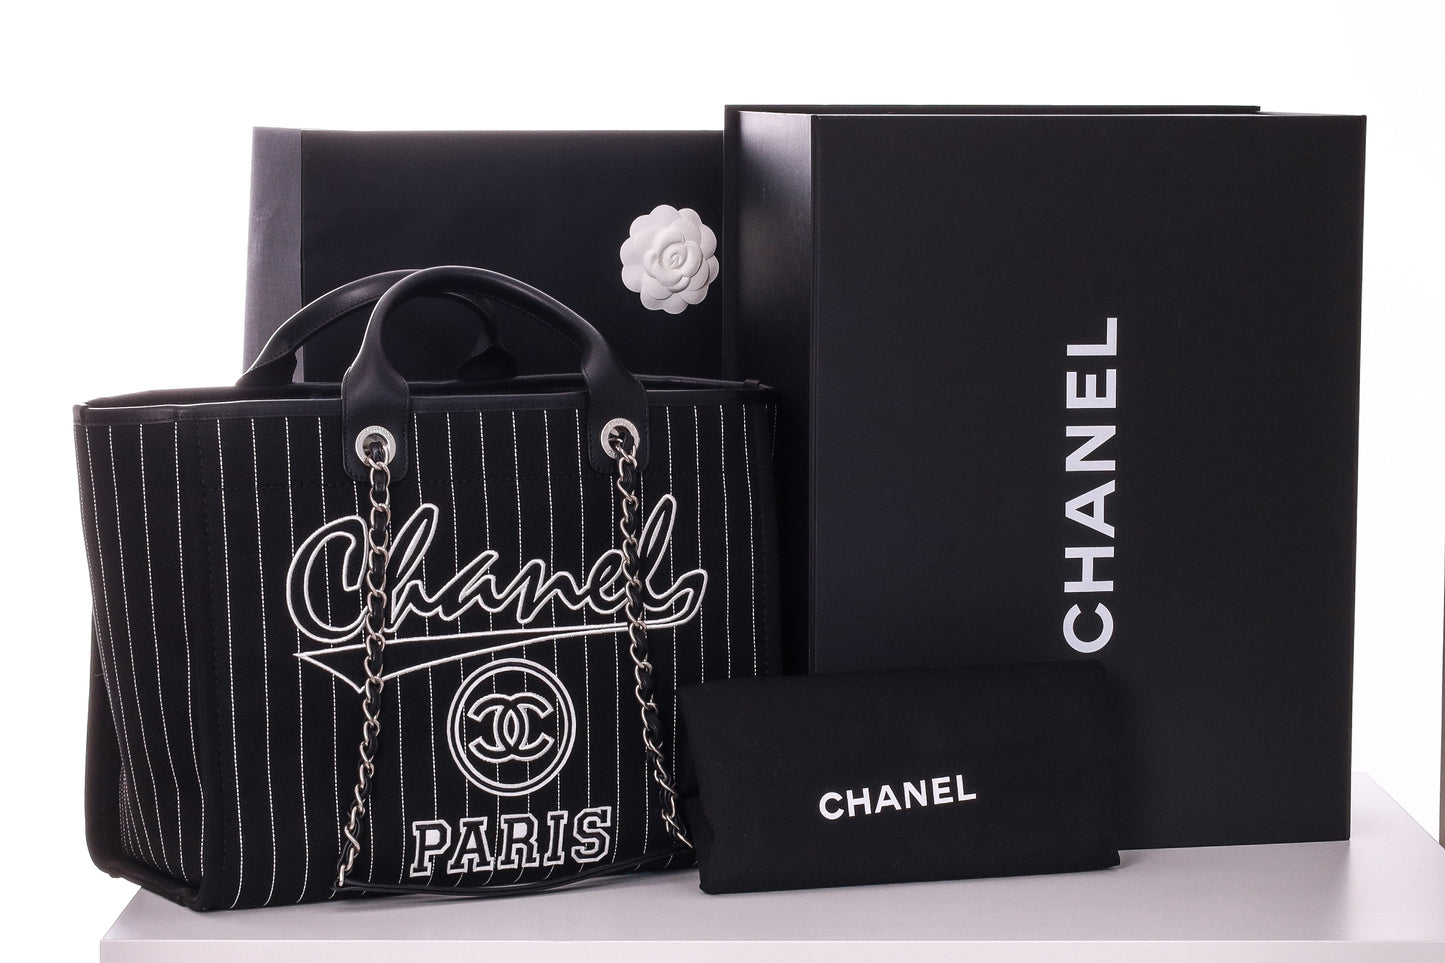 CHANEL DEAUVILLE SPECIAL EDITION A66941 B10404 Large Shopper Tote Bag